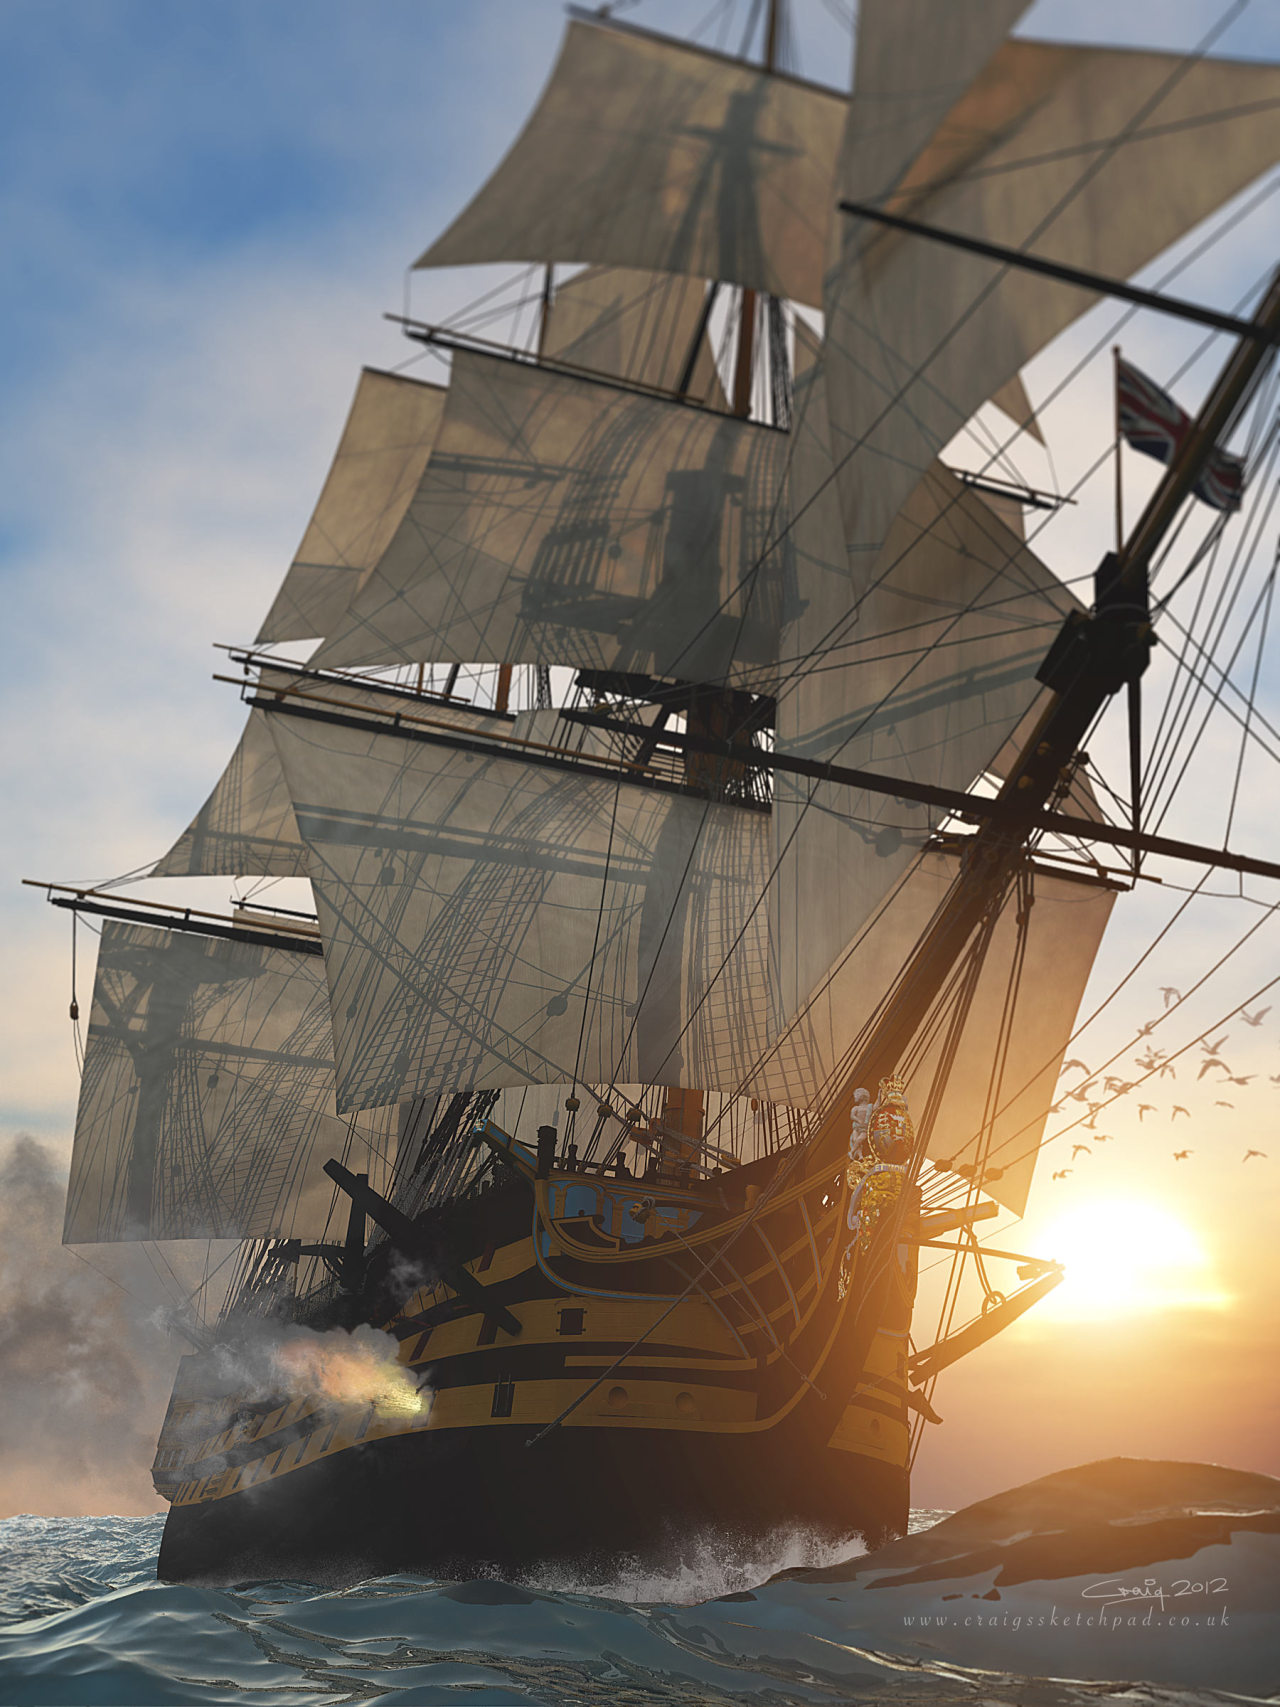 ritasv:
“ HMS Victory in action by cj-productions
”